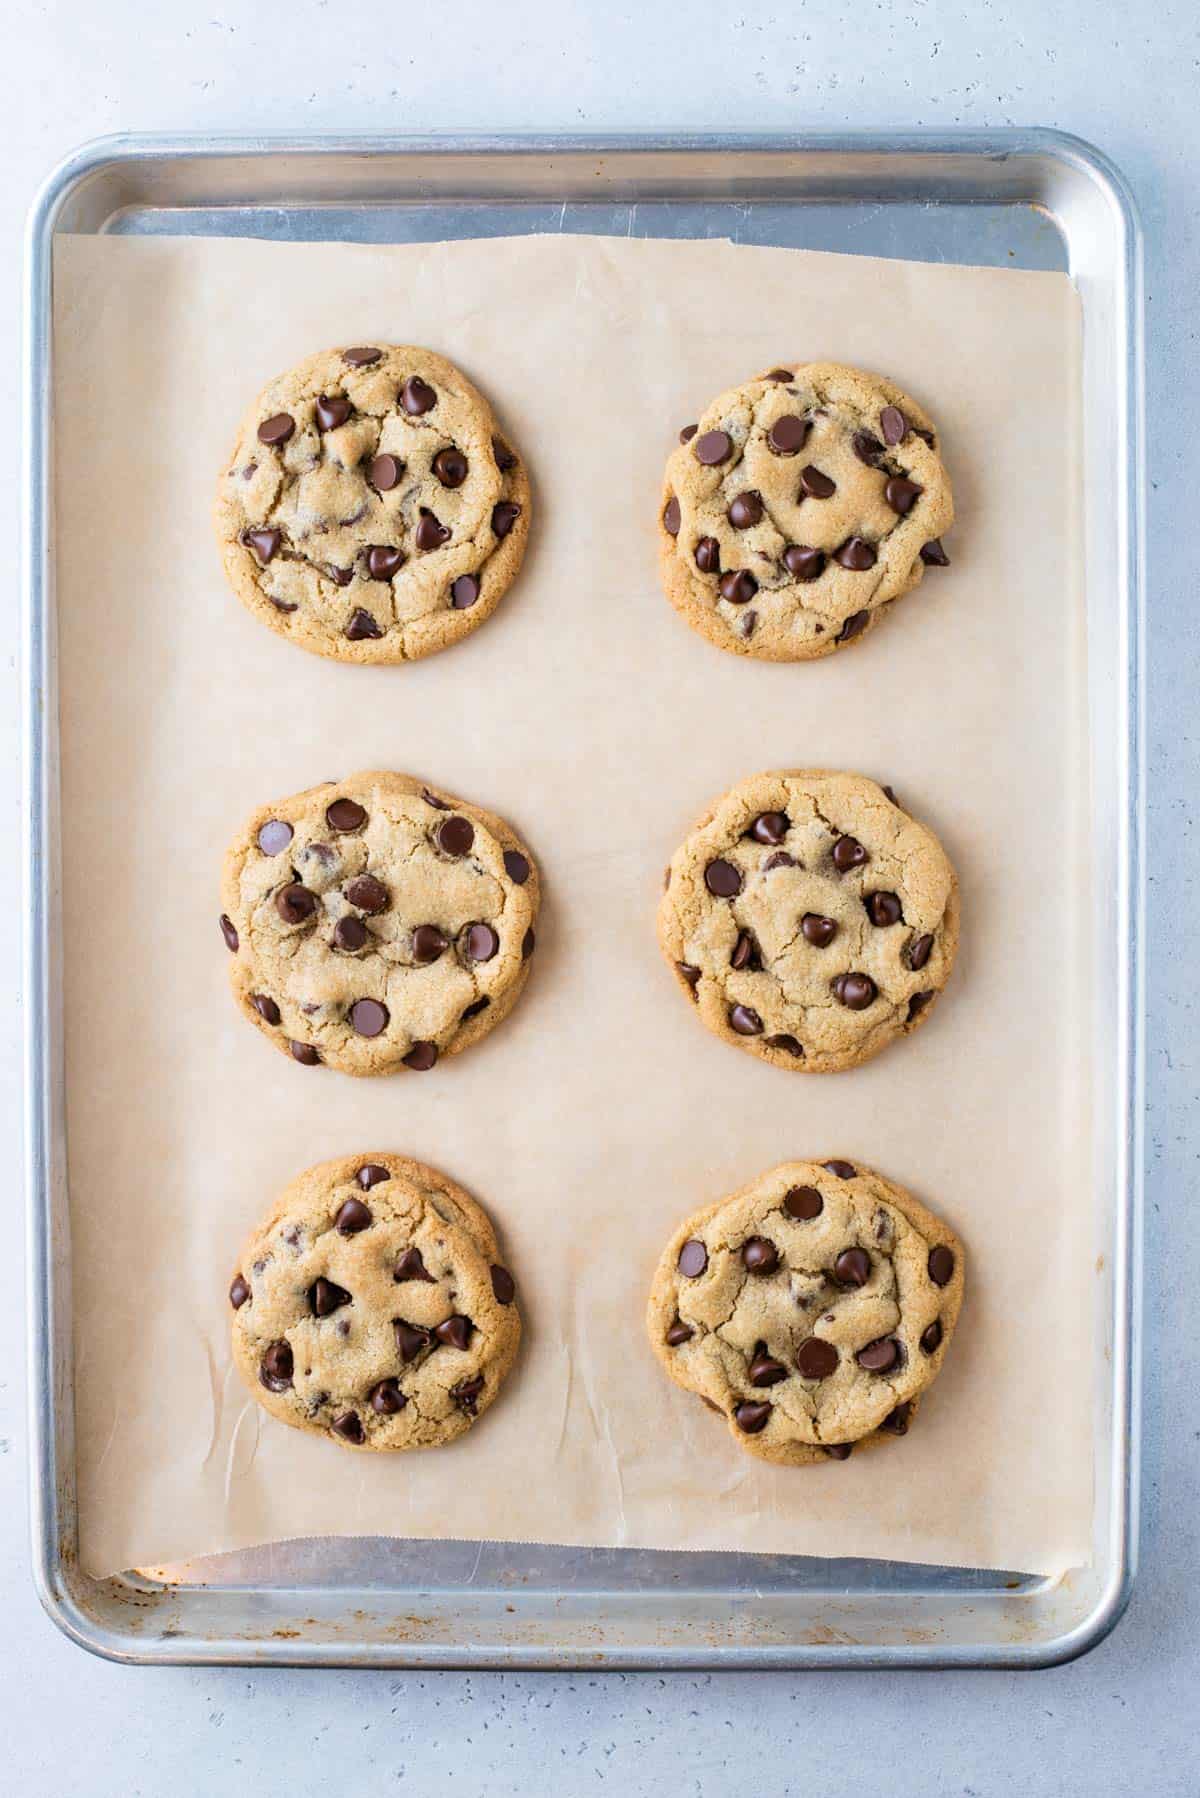 Overhead view of 6 chocolate chip cookies on parchment-lined baking sheet